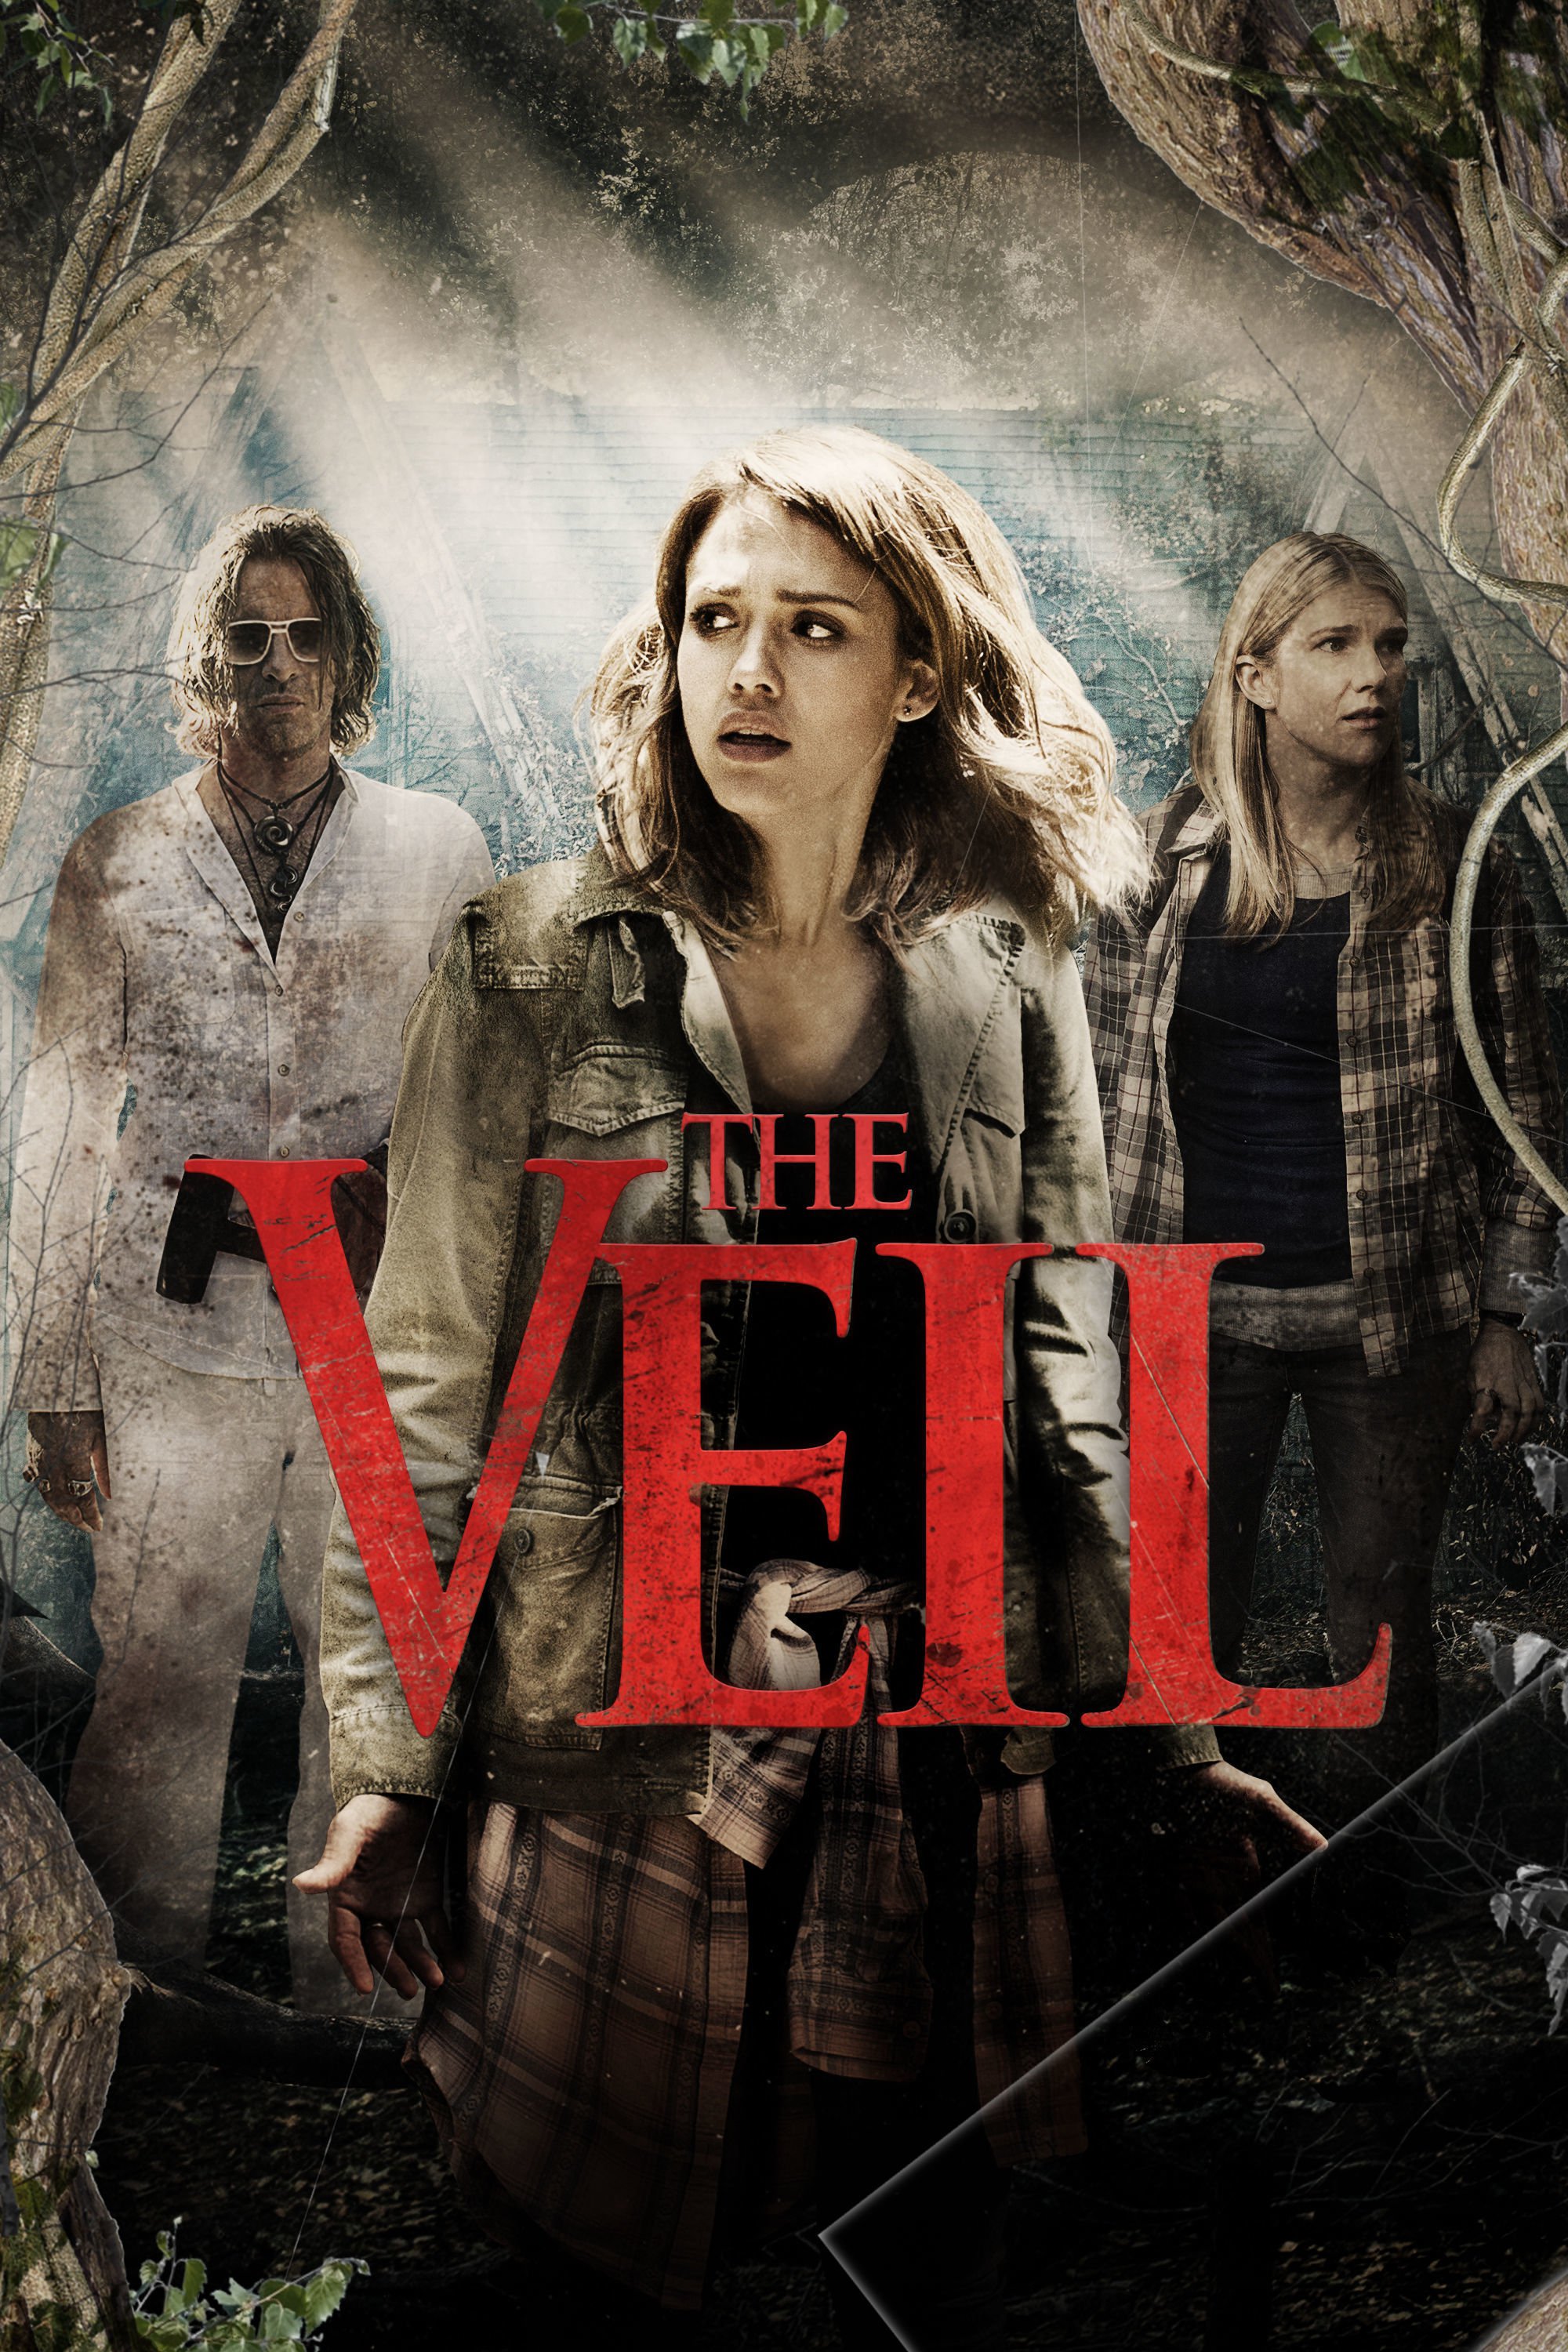 Poster for the movie "The Veil"